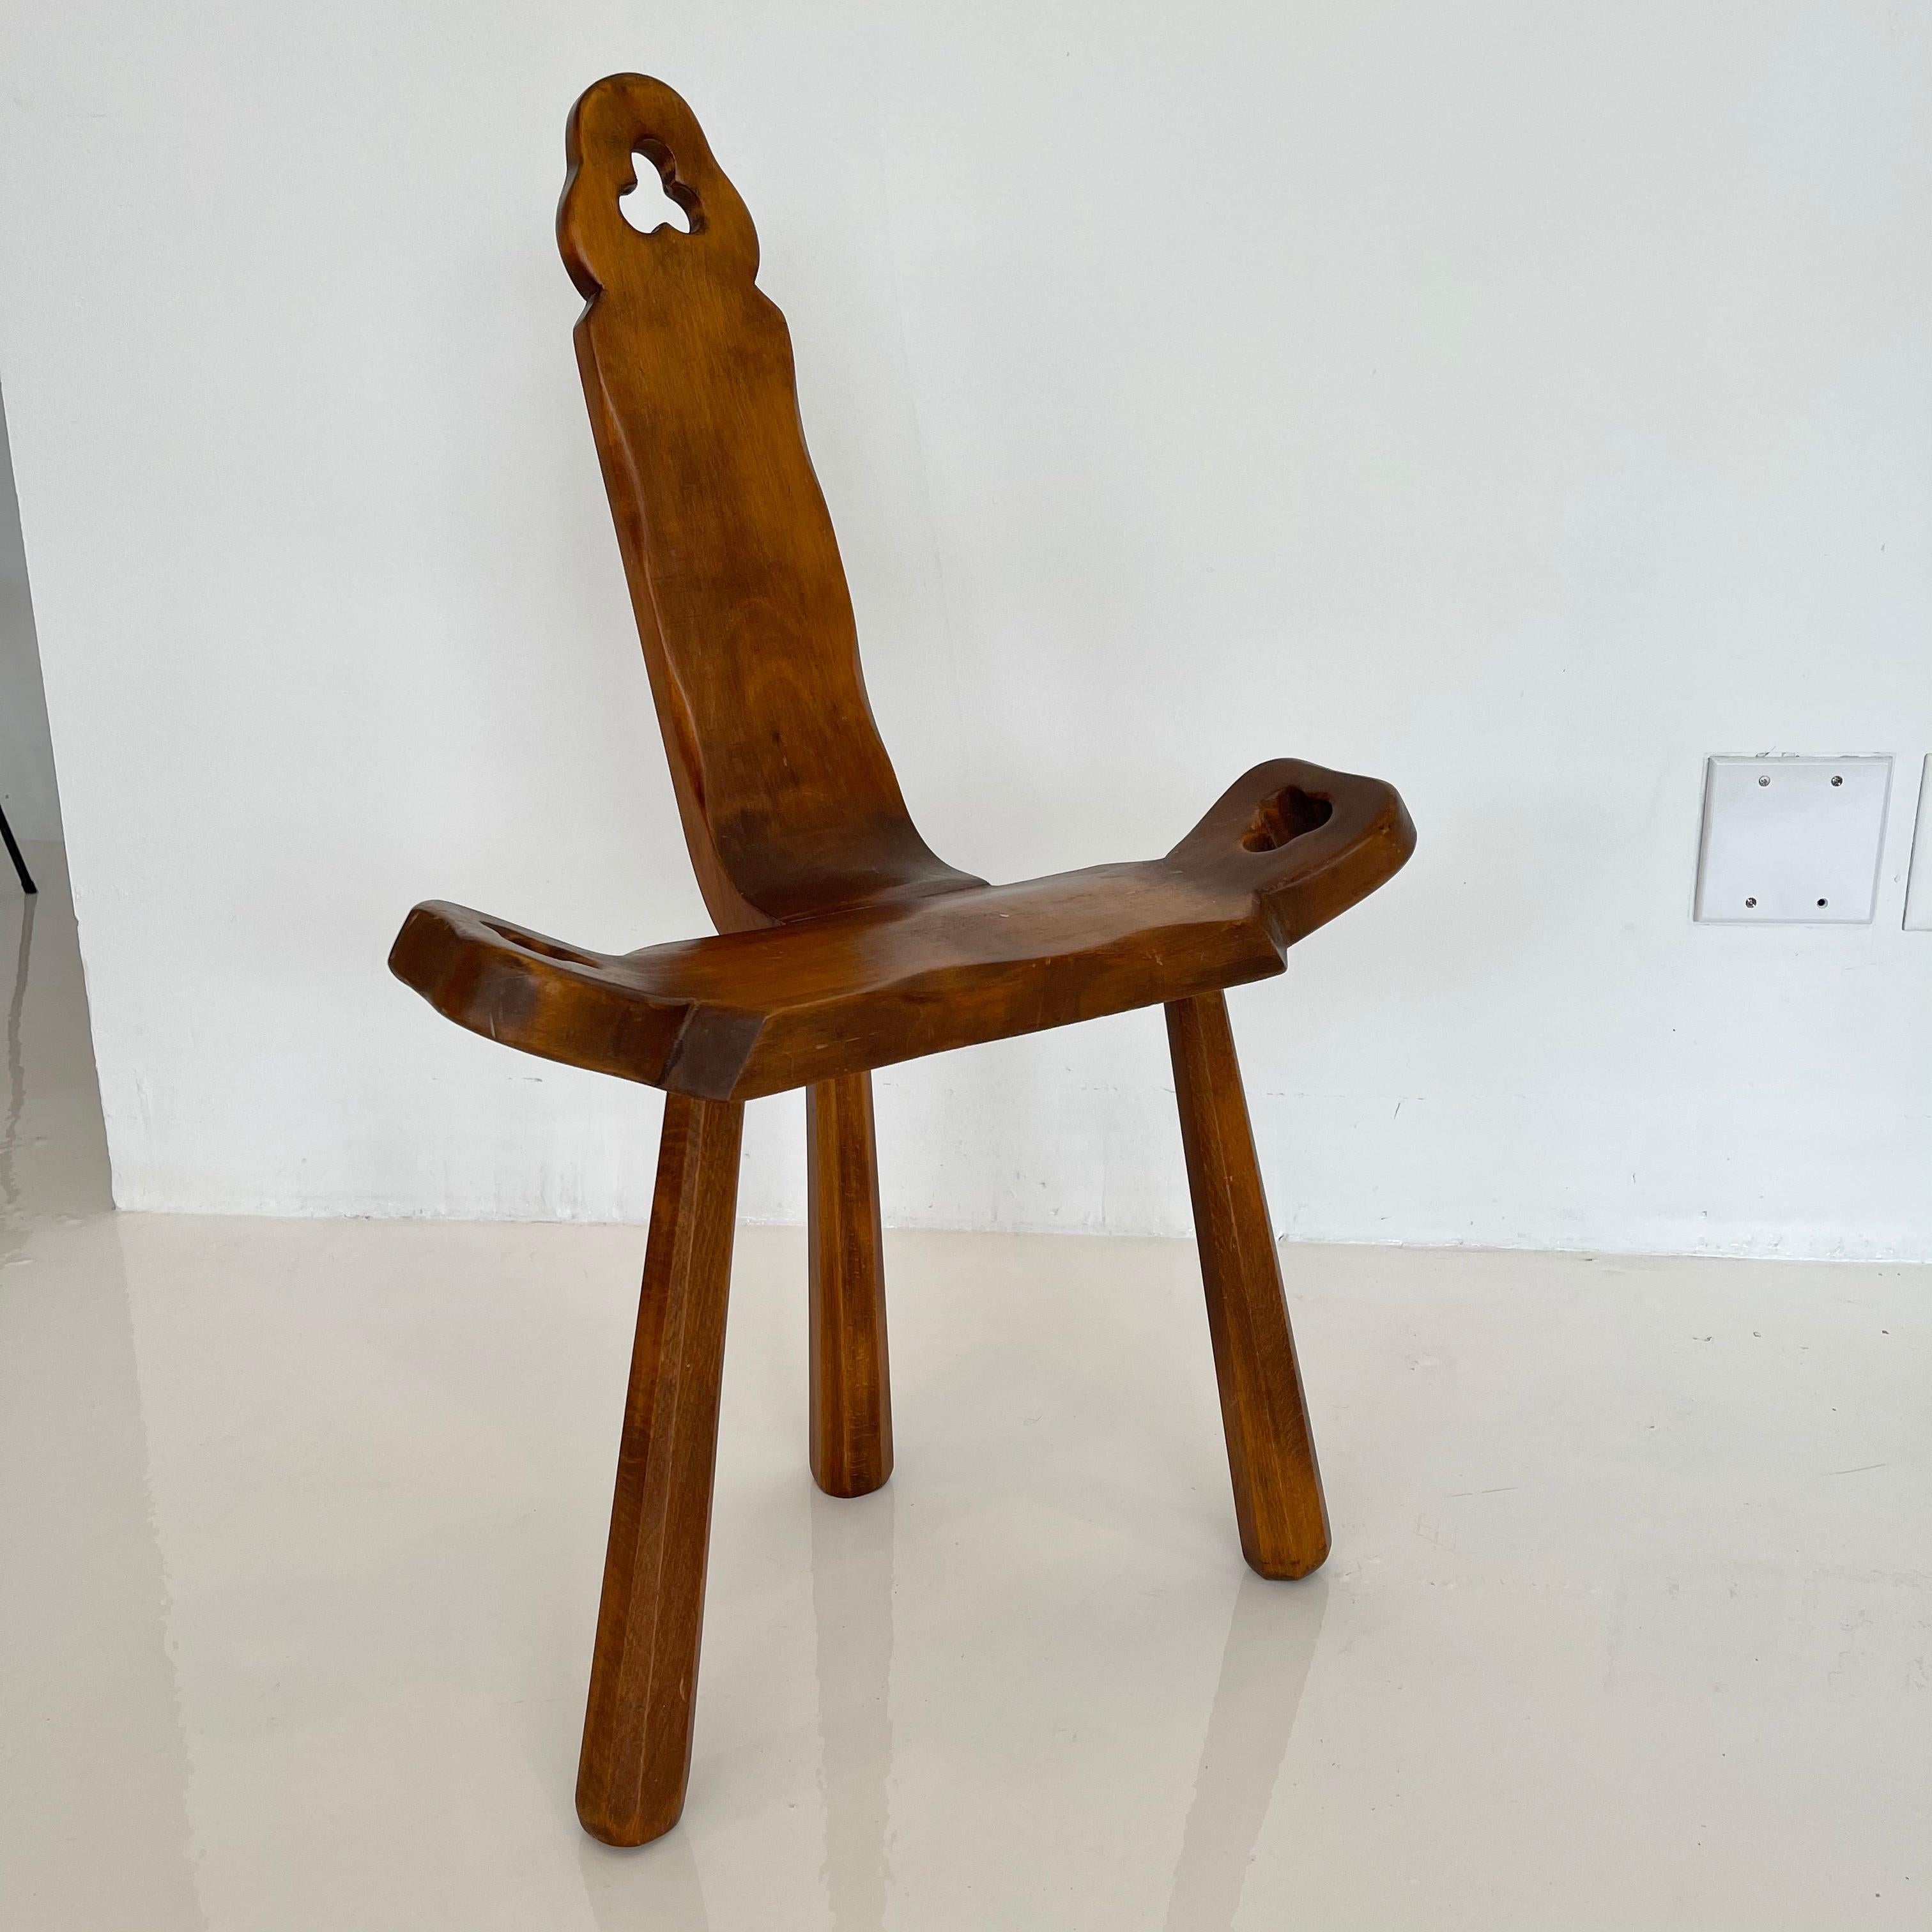 Interesting wood tripod chair from Spain. Notched holes in head rest and both arms. Historically used as a birthing chair. Great piece of functional sculpture. Good condition to wood. Slight lean which does not affect stability.